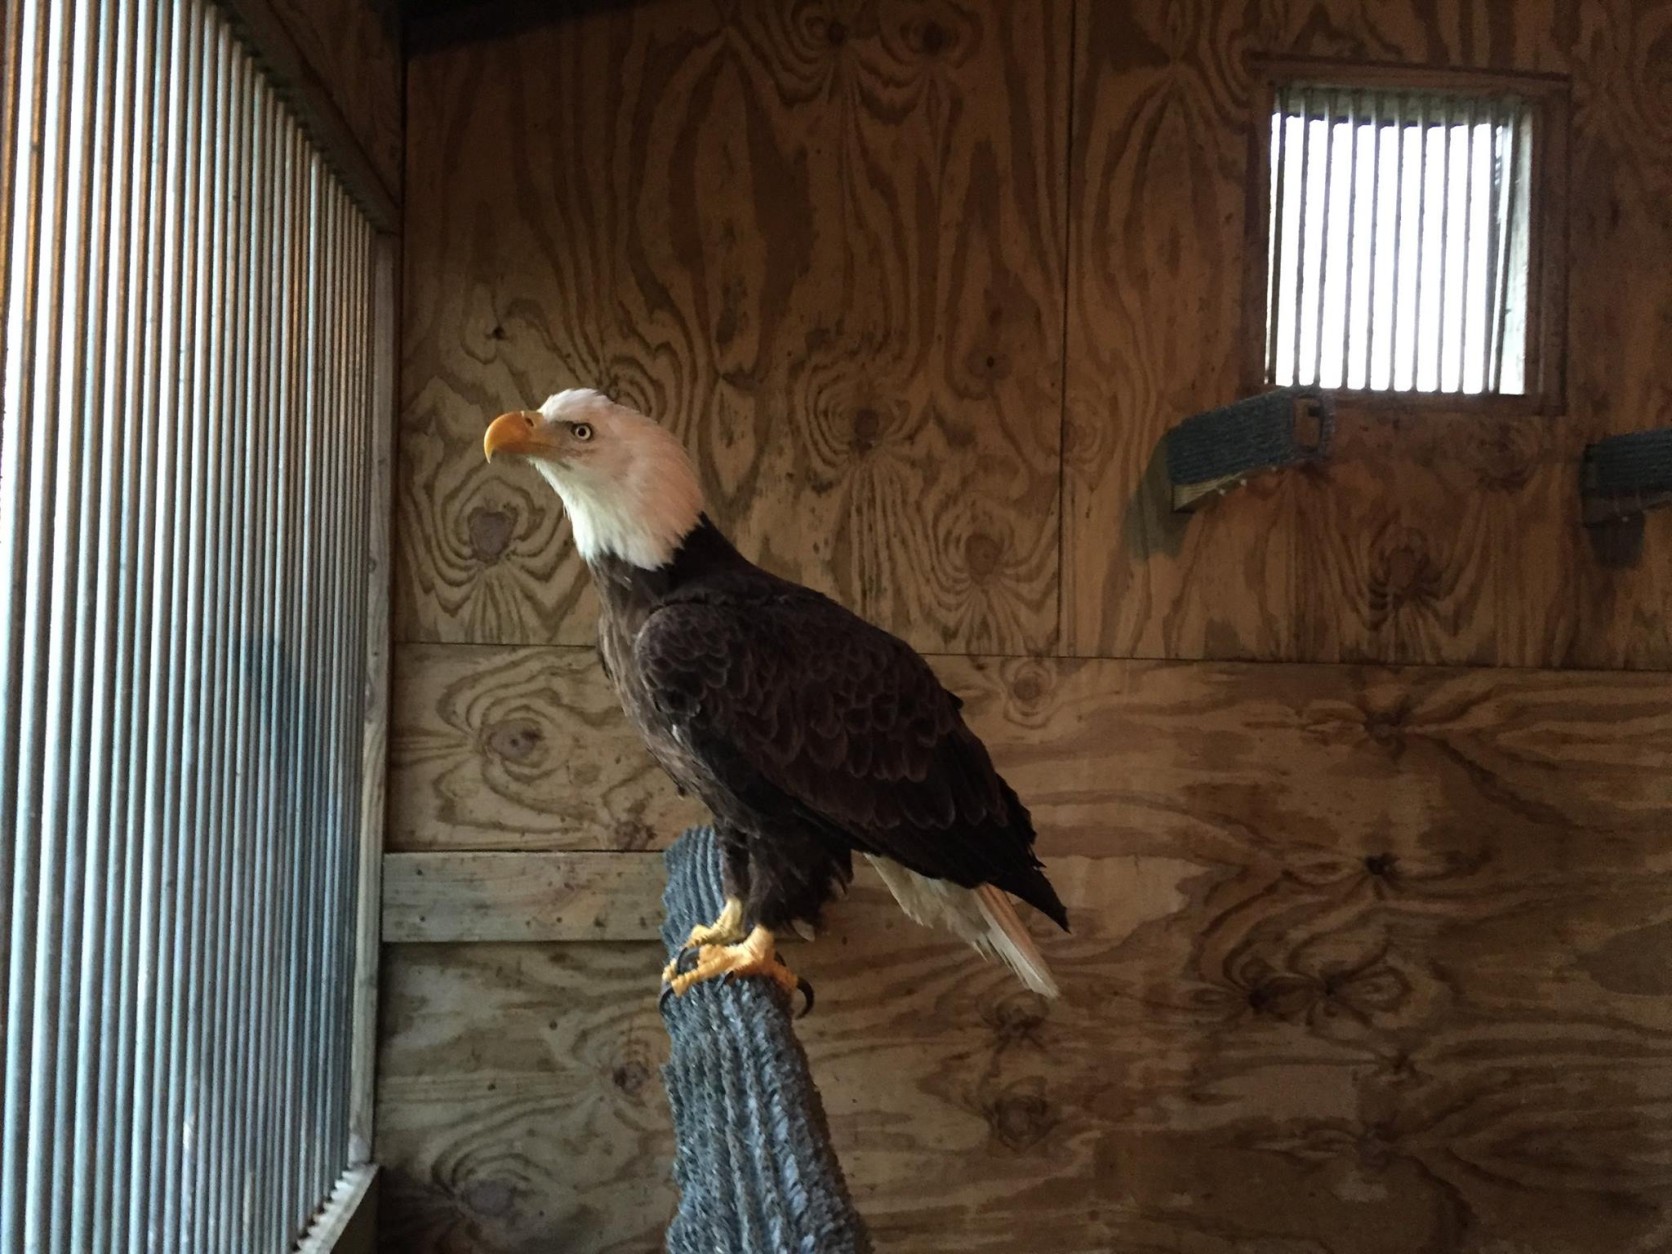 “The bone was fairly displaced so we were worried about the ability for her to fly again,” said Suzanne Shoemaker of Owl Moon Raptor Center. (Courtesy Owl Moon Raptor Center)